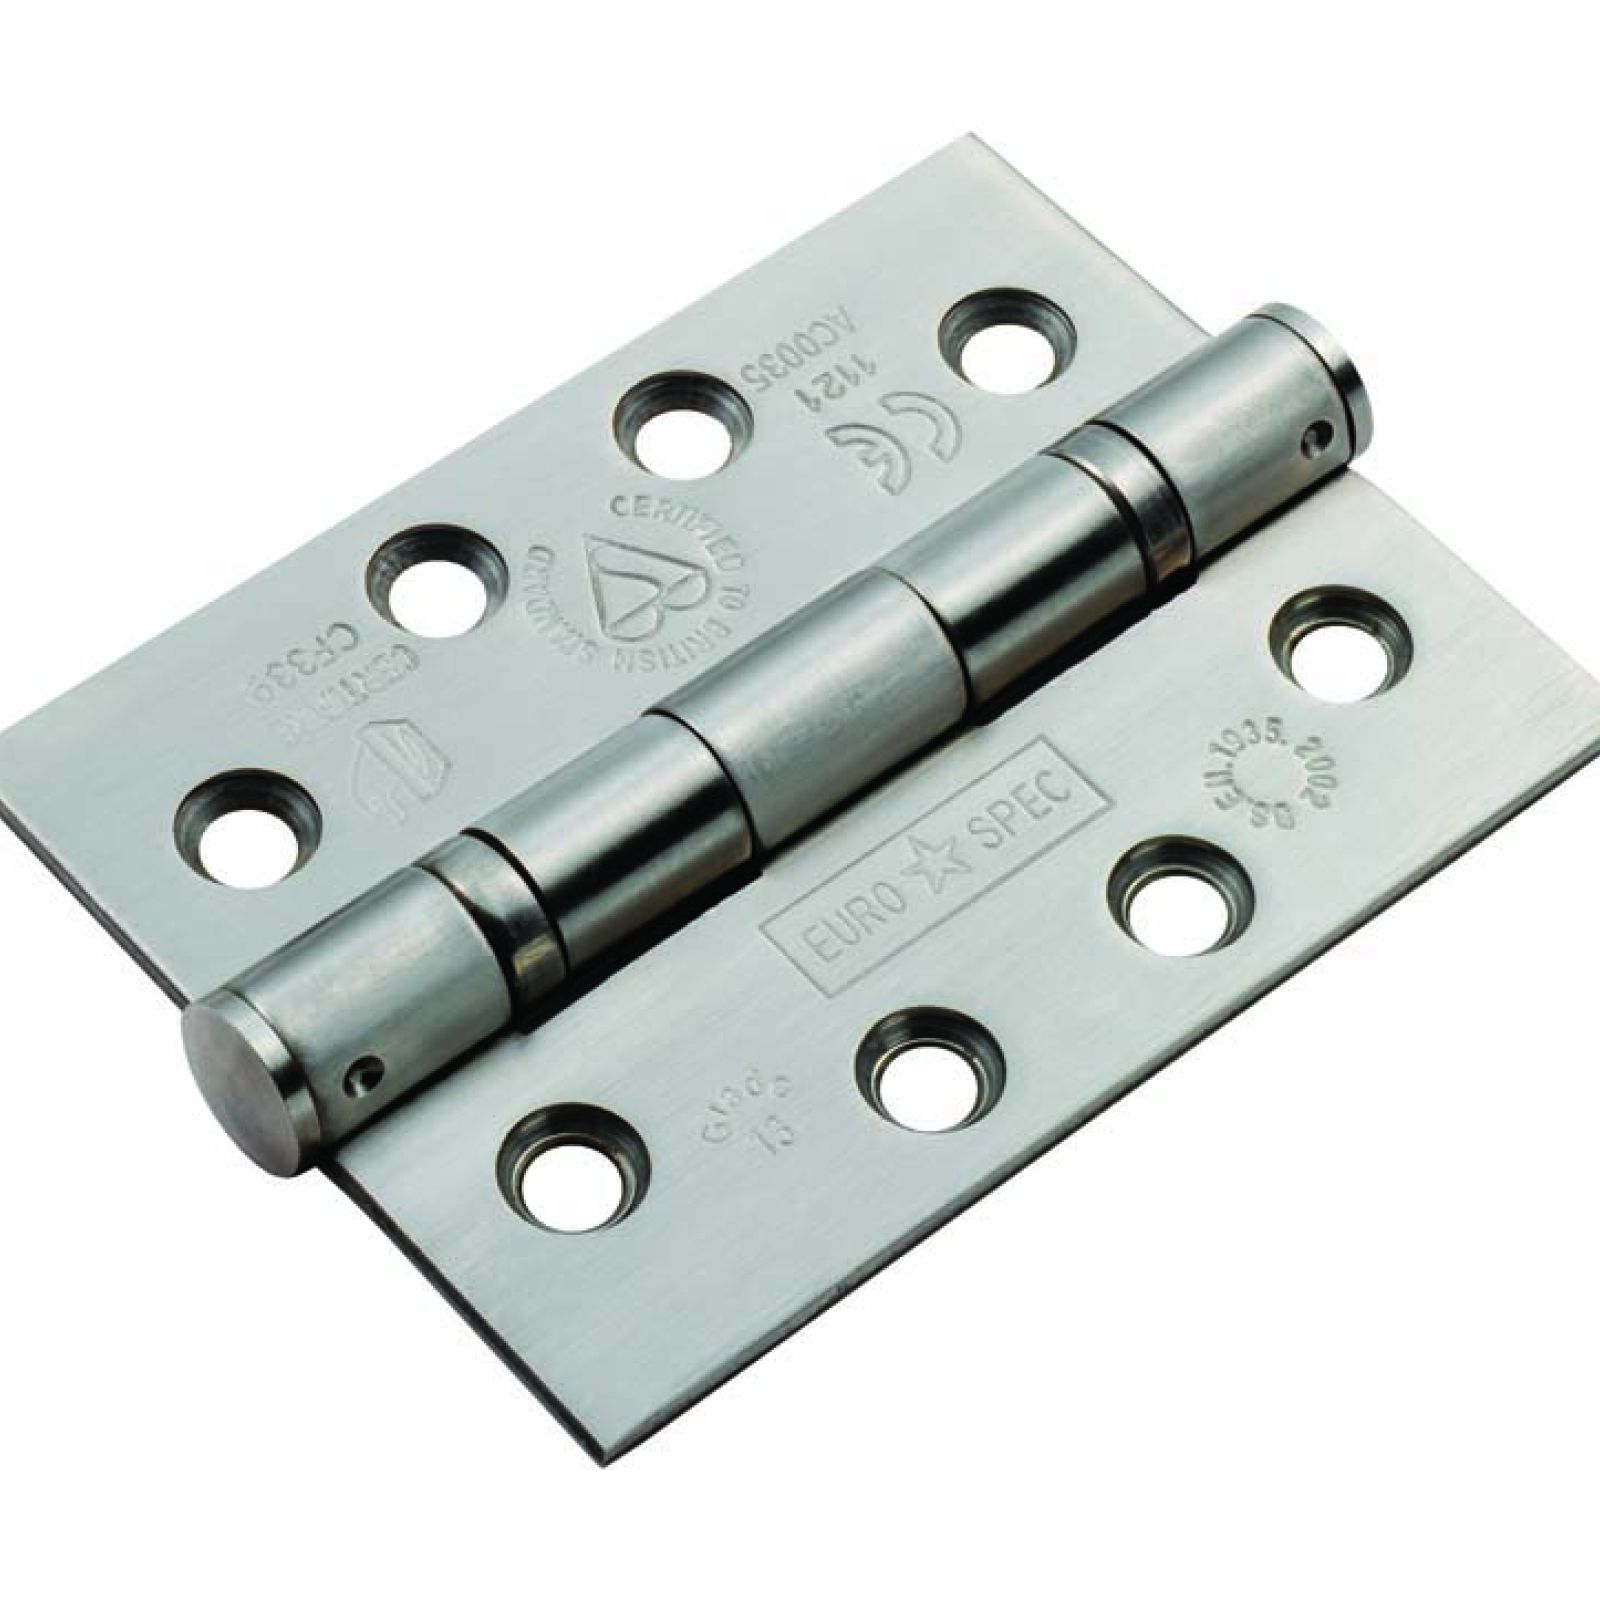 Ball Bearing Hinge in brass or steel and a choice of sizes